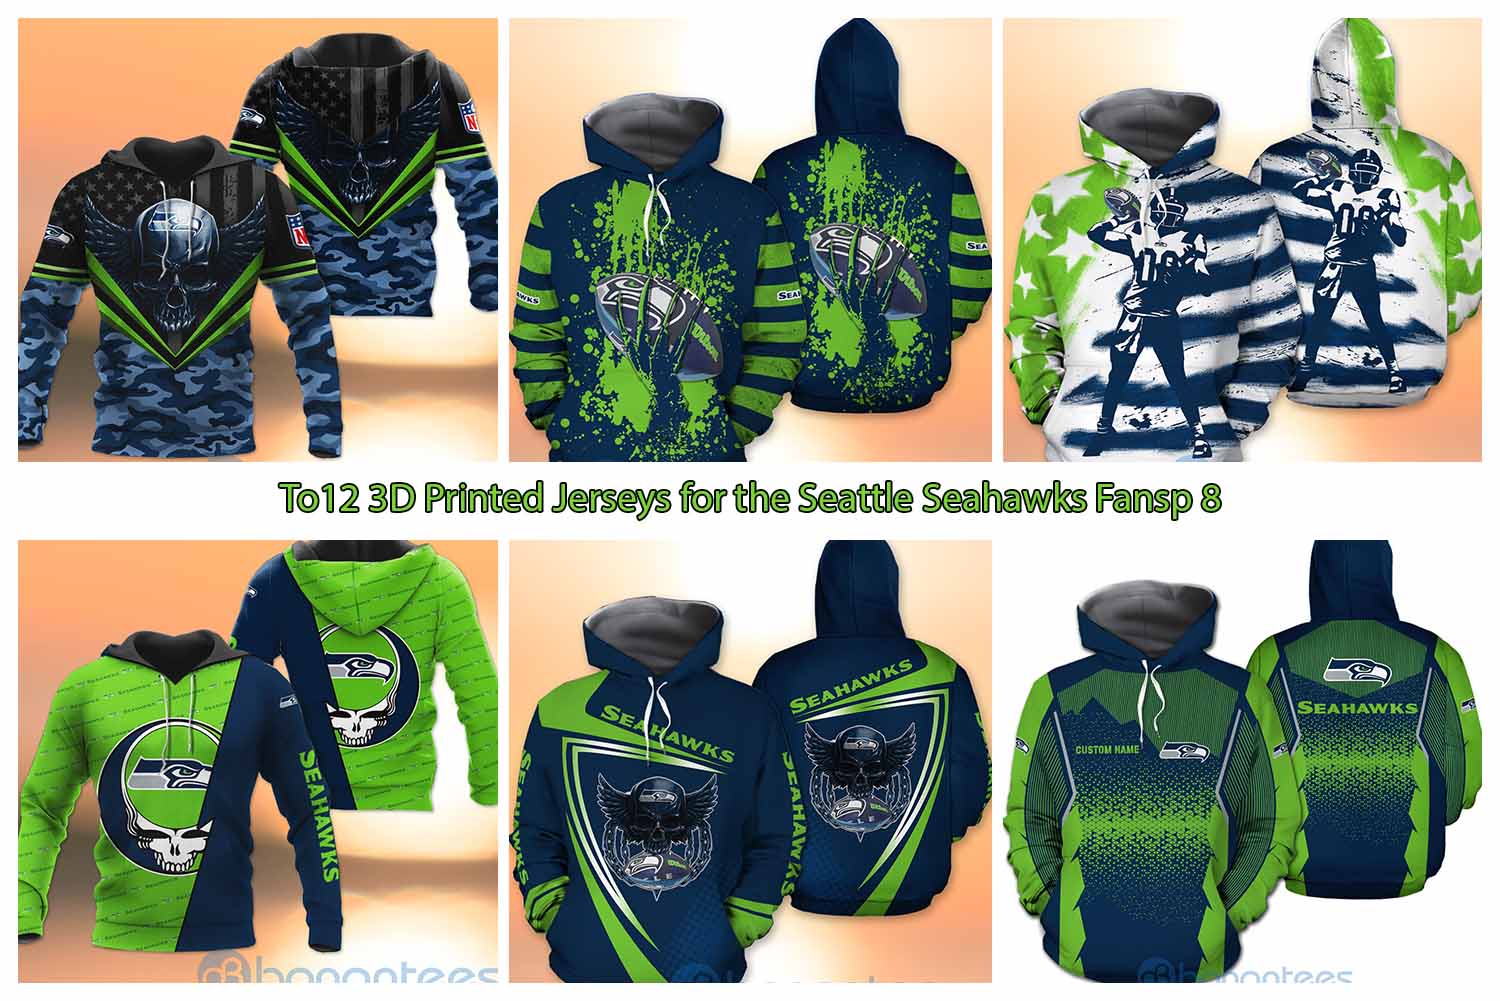 12 3D Printed Jerseys for the Seattle Seahawks Fans